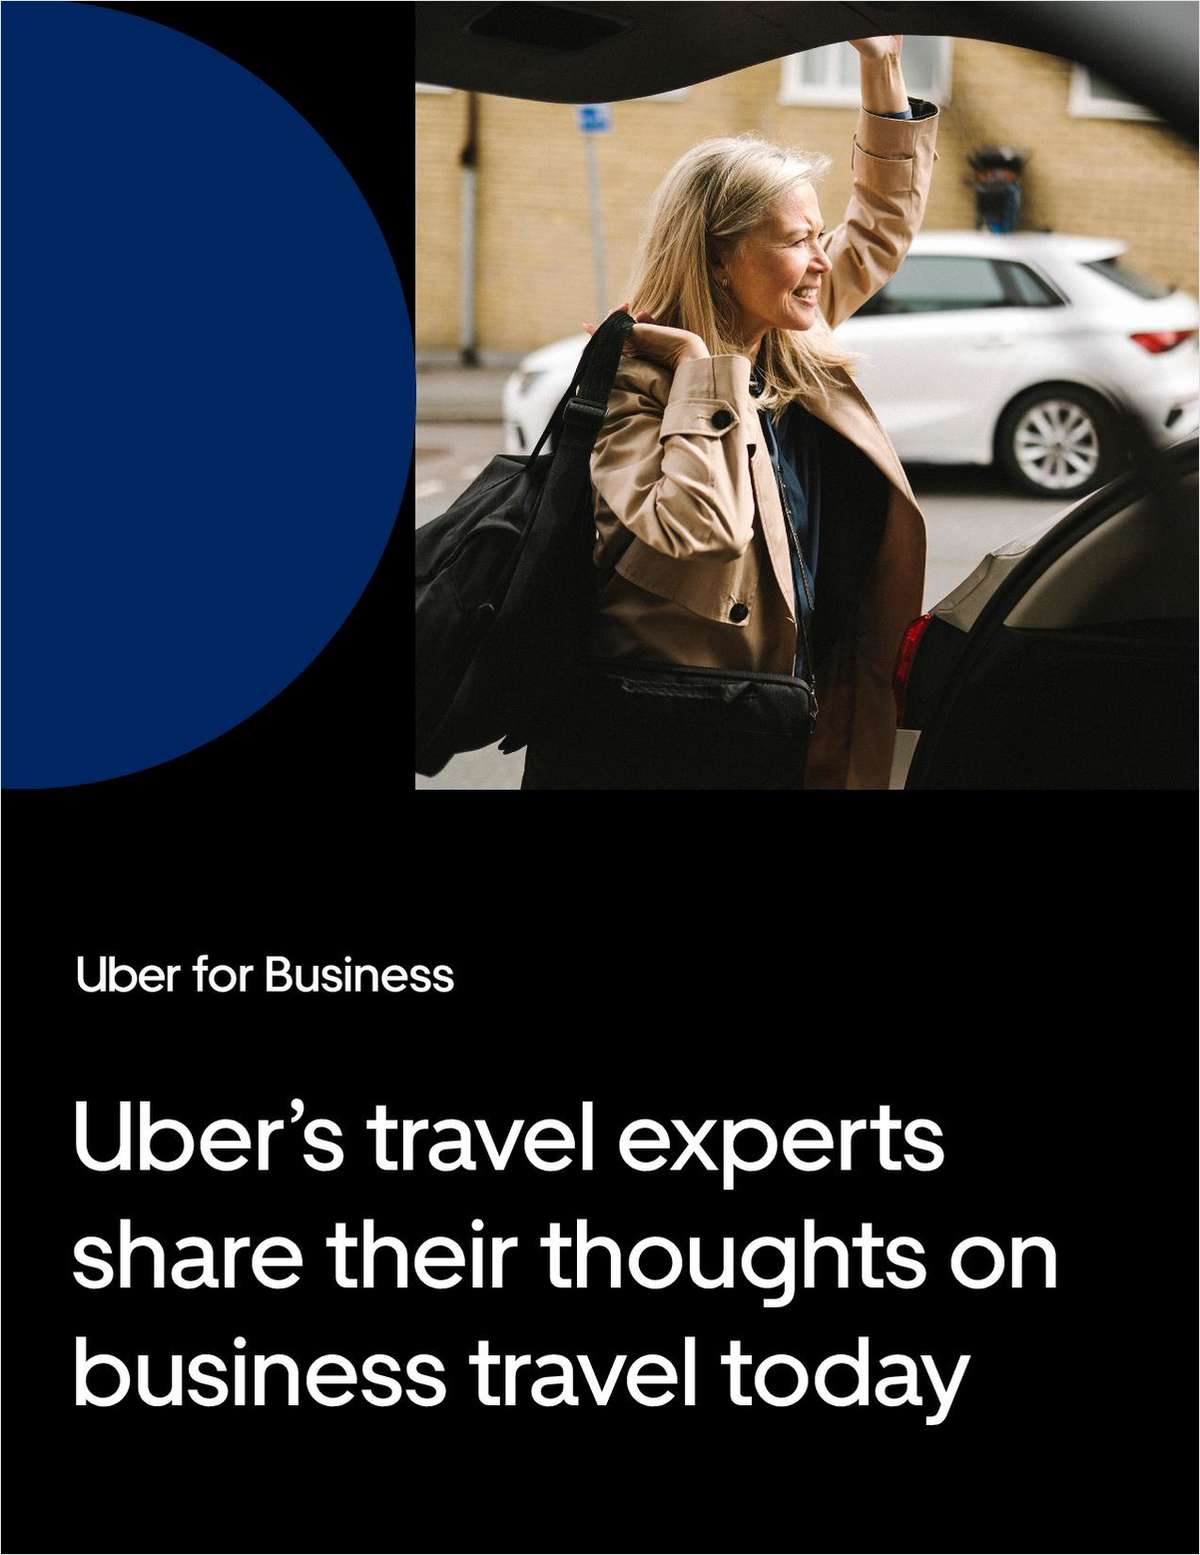 Uber's travel experts share their thoughts on business travel today